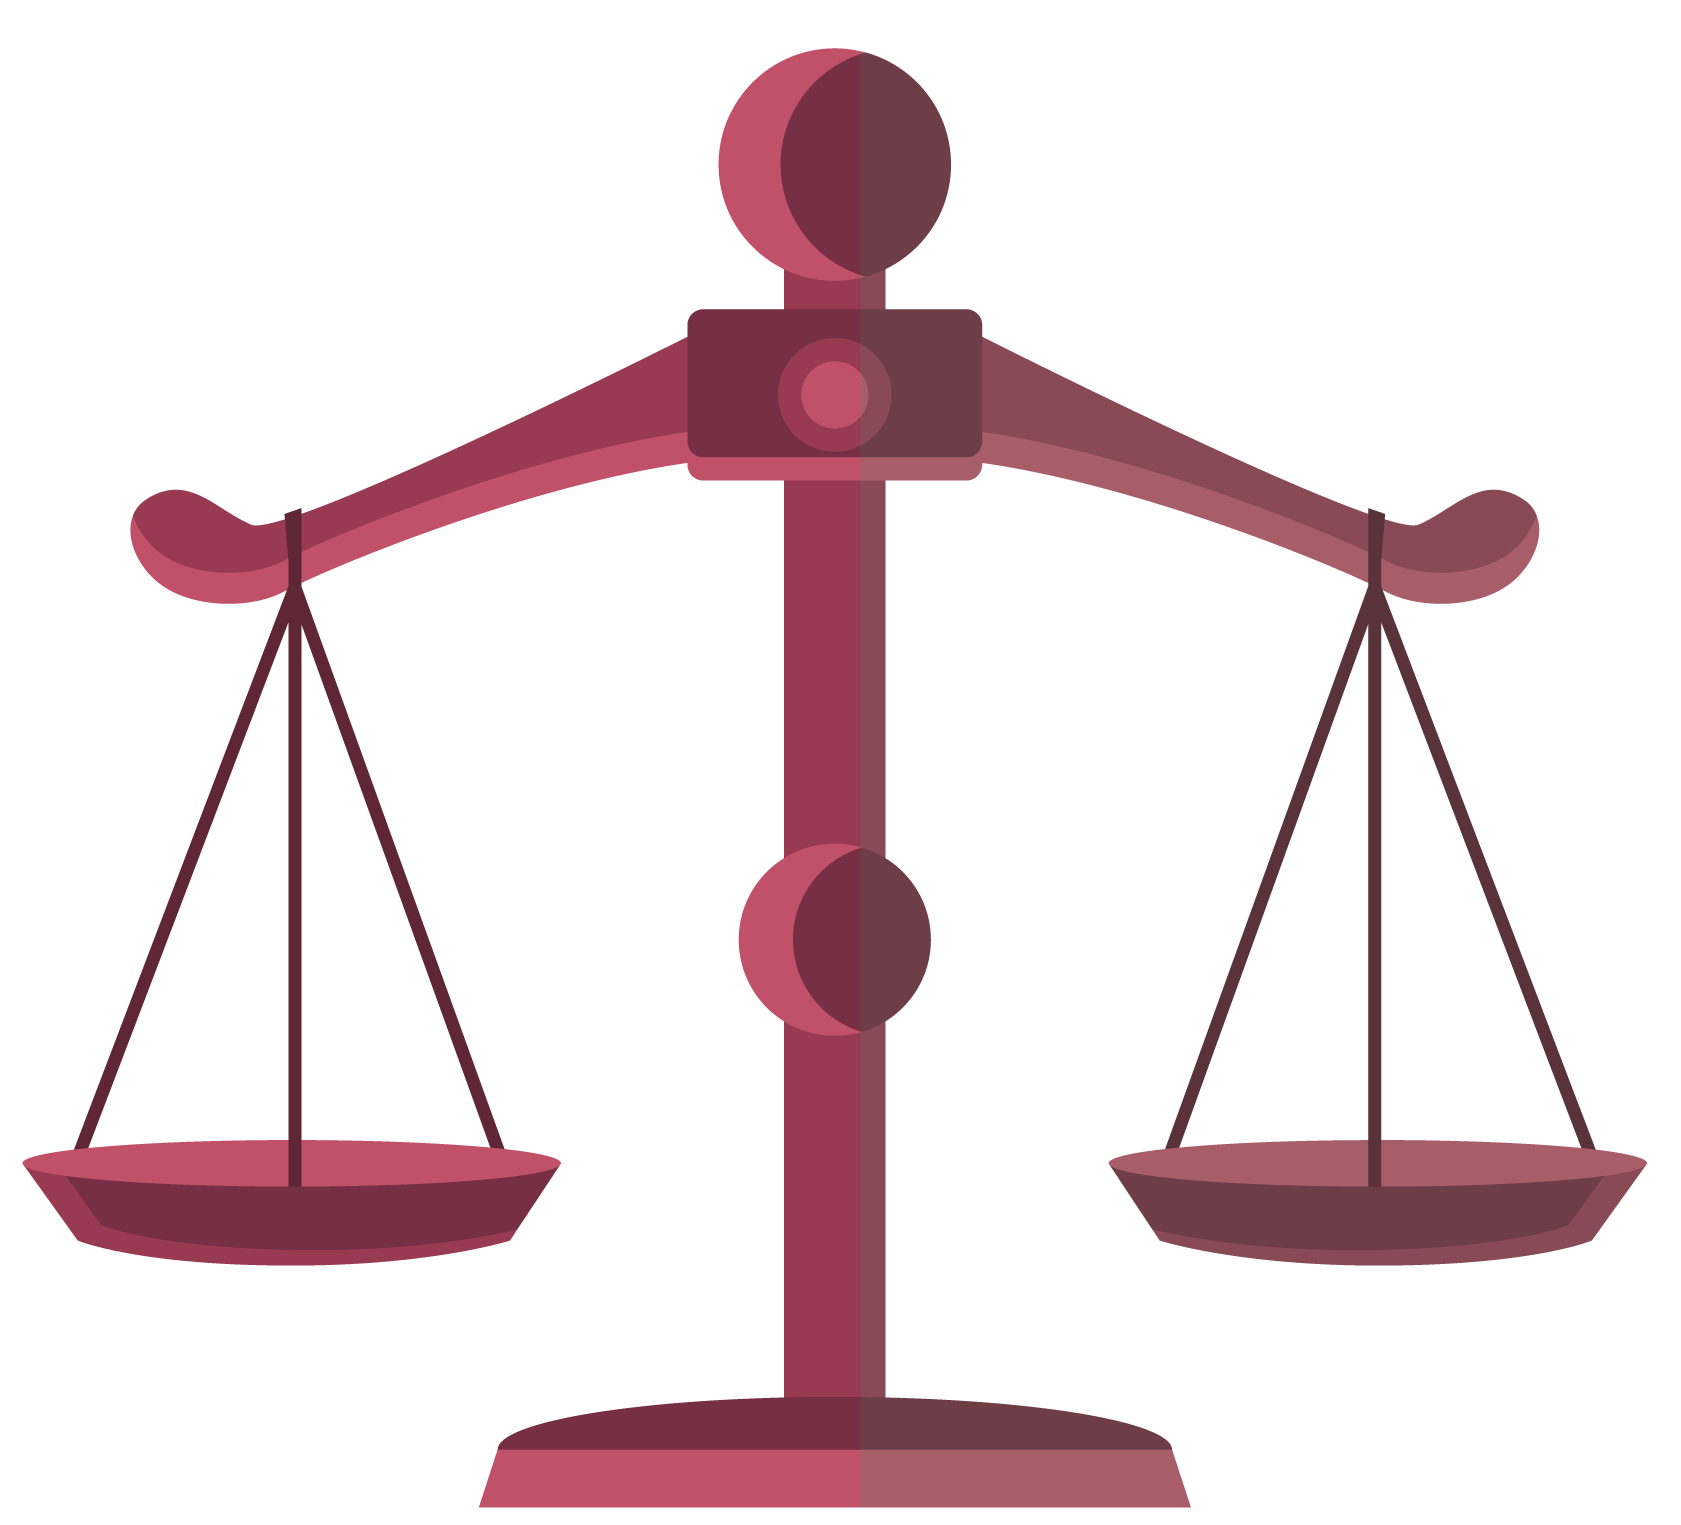 Law clipart balance scale. Lawyer dui attorney